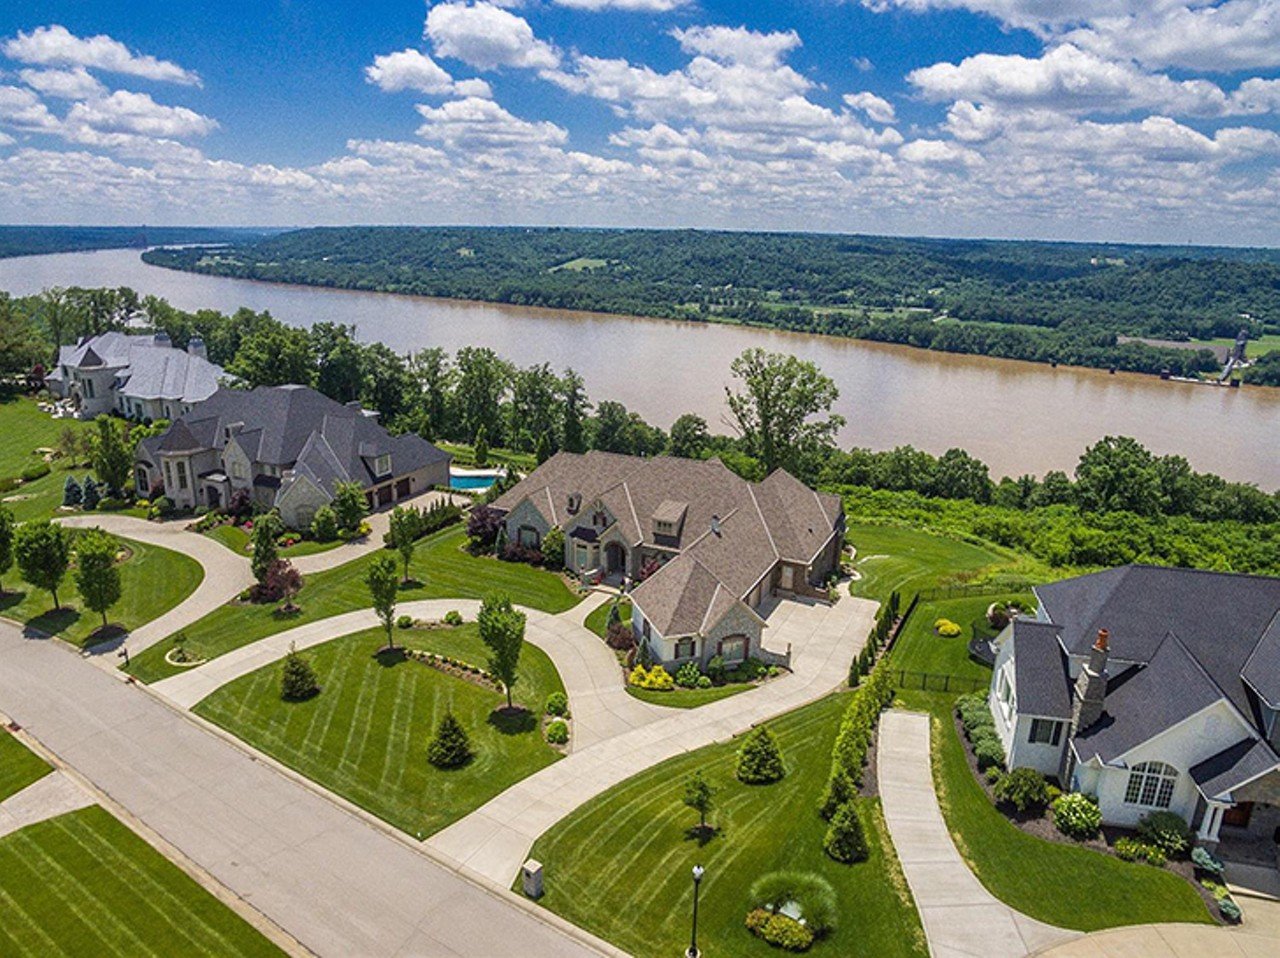 7935 Ayers Road, Anderson Township
$2,945,000 | 4 bd/ 7 ba | 7,855 sq. ft. | Year Built: 2014 
This enormous East Side ranch is situated on a scenic plot of land overlooking the Ohio River. With an open floor plan and large windows throughout the home, the light-filled space is perfect for entertaining.